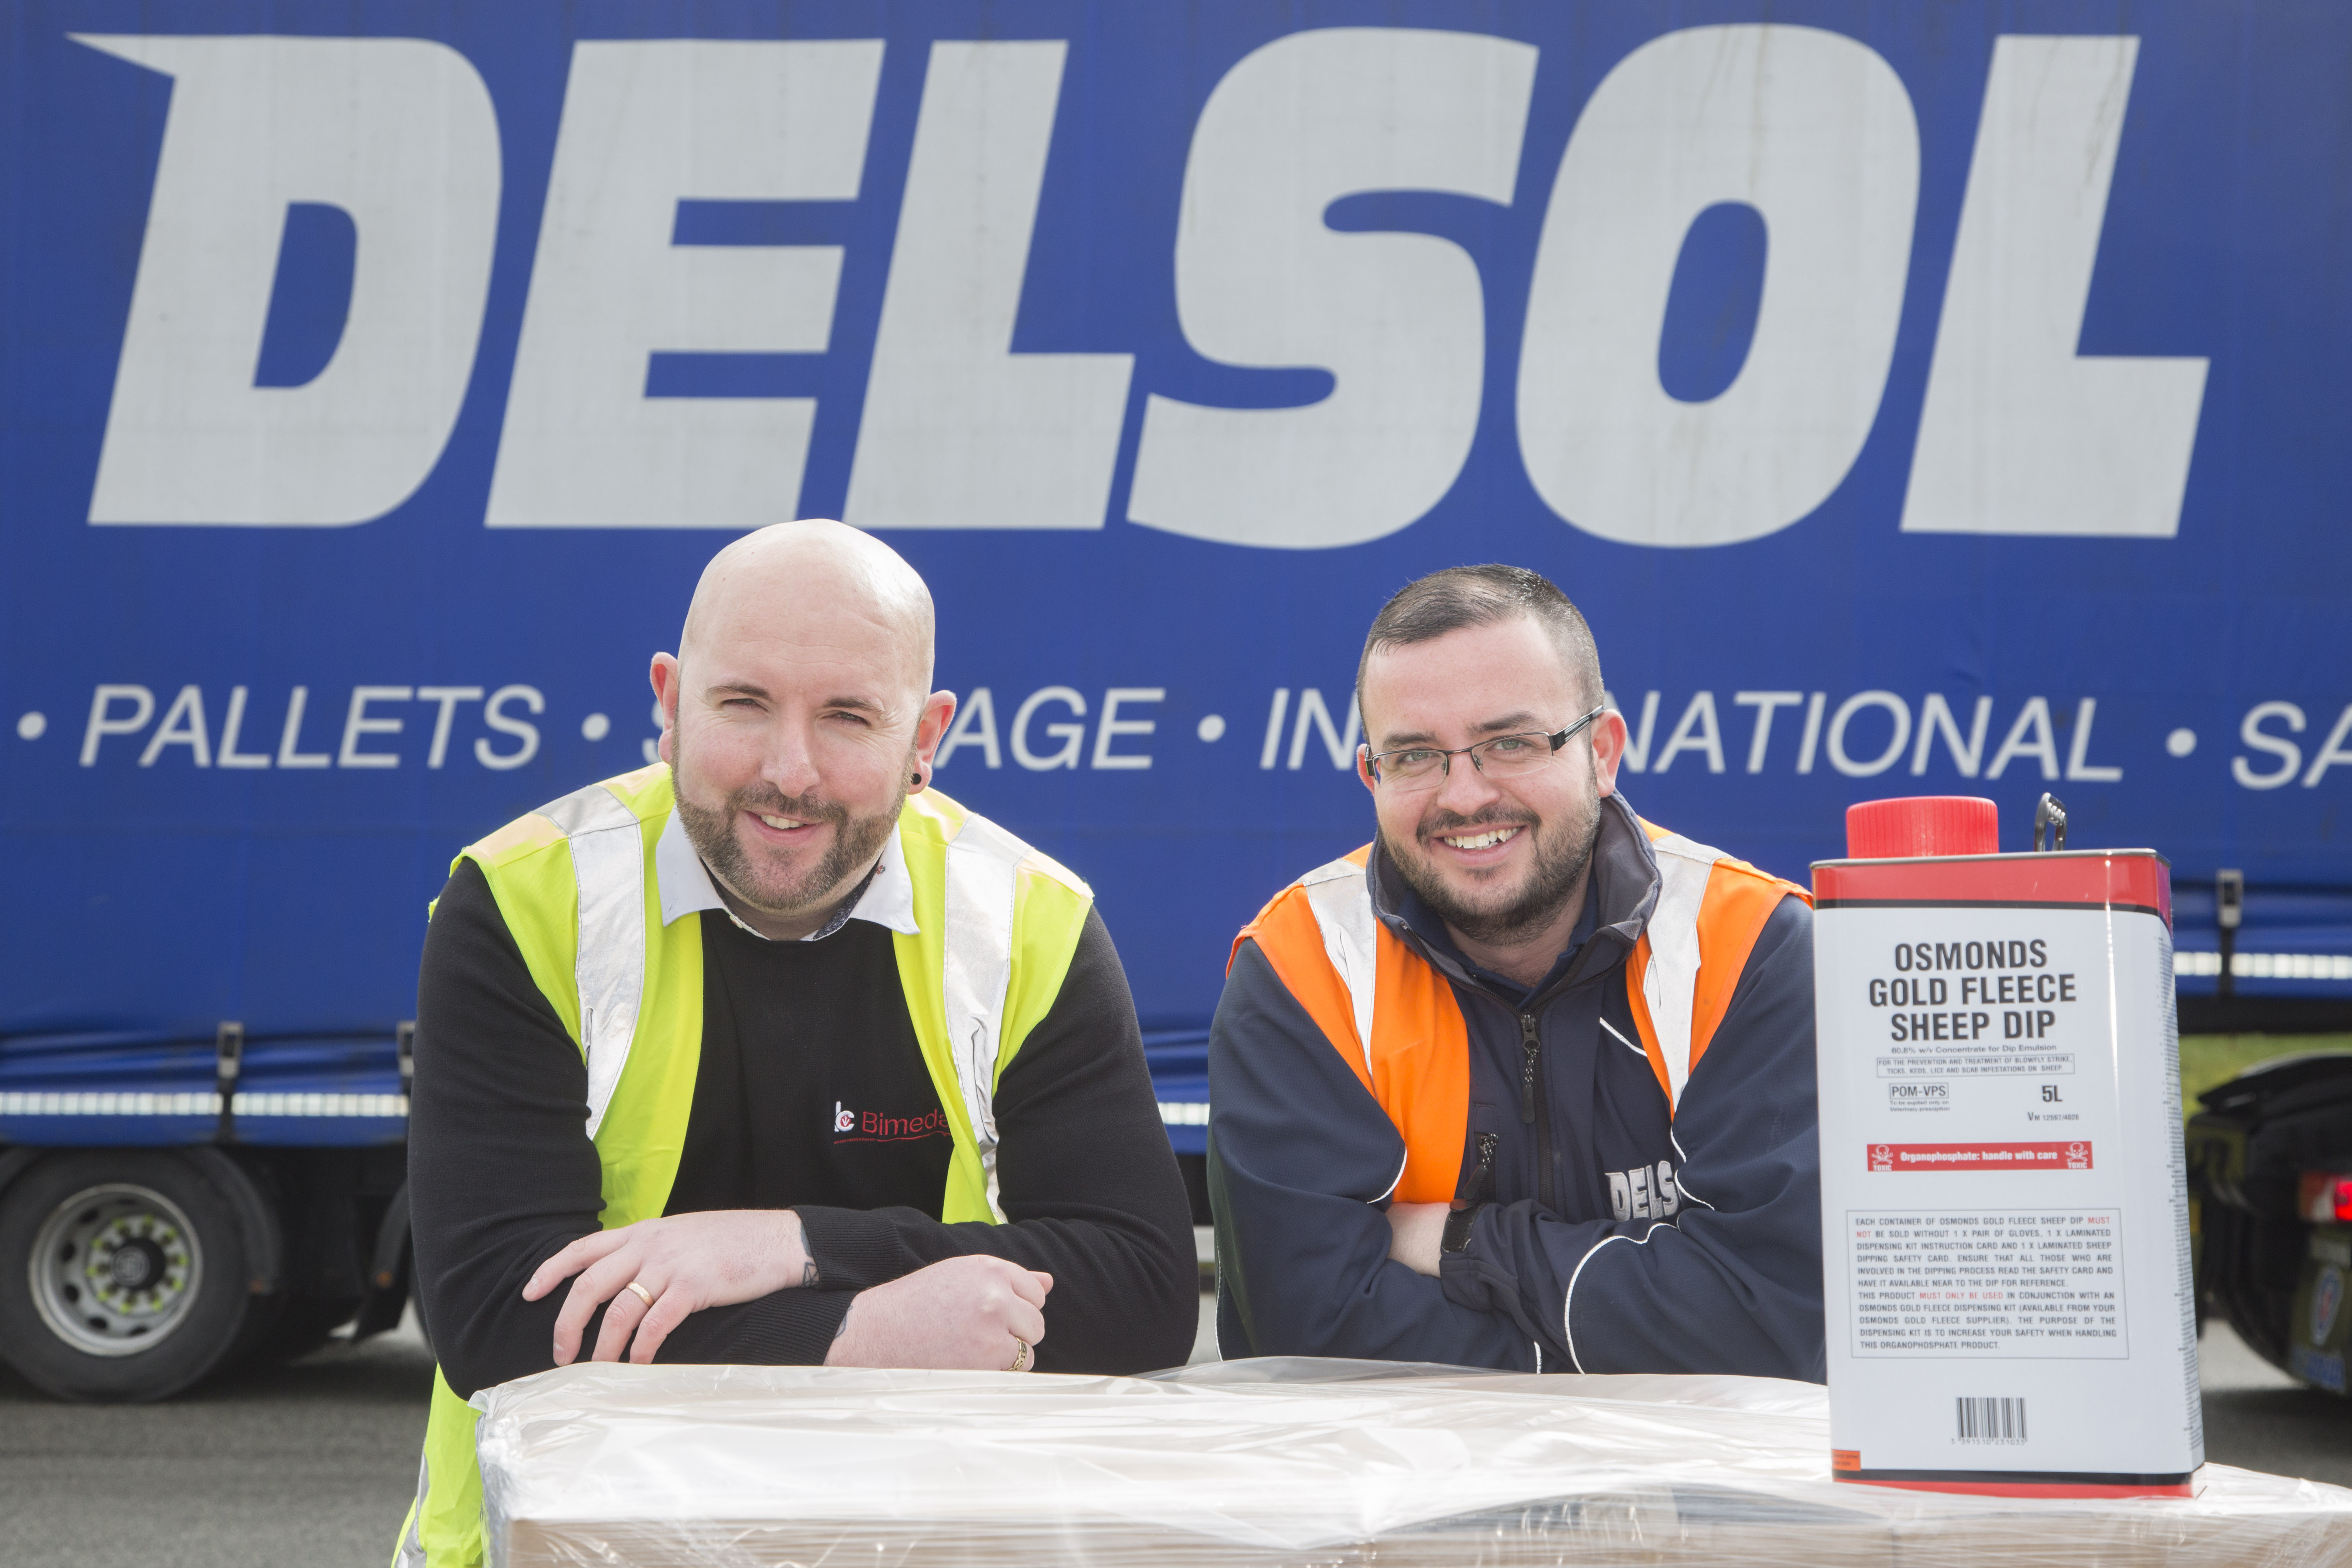 Vital supplies for farm vets on the road from North Wales thanks to delivery company Delsol